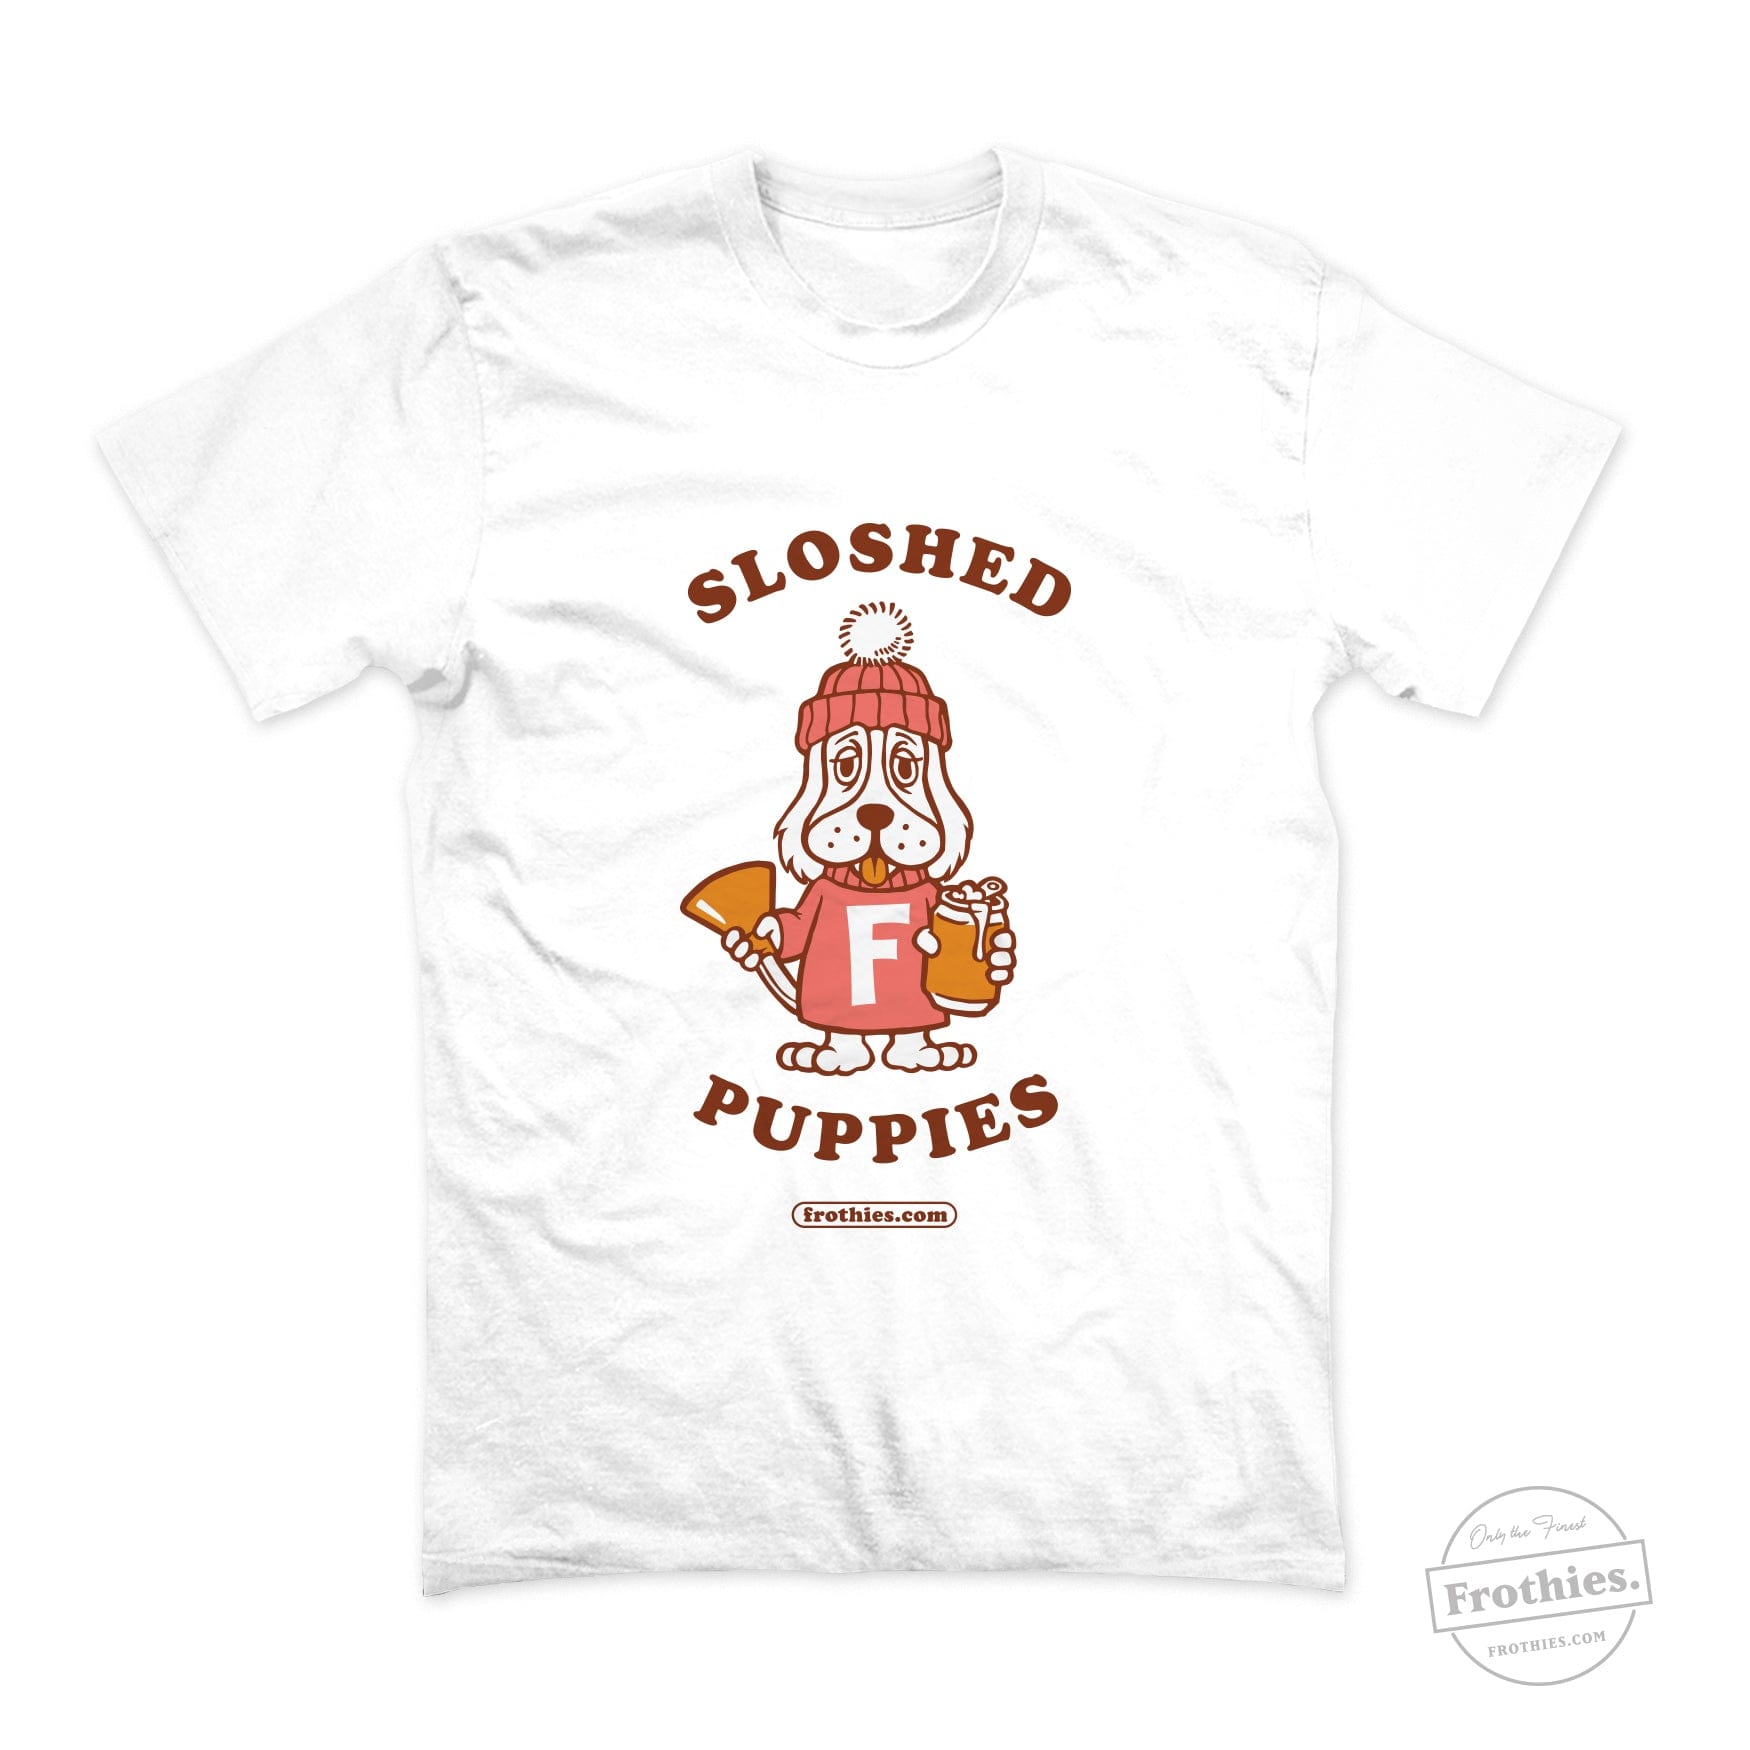 Sloshed Puppies - Bootleg Tee T-Shirt Frothies